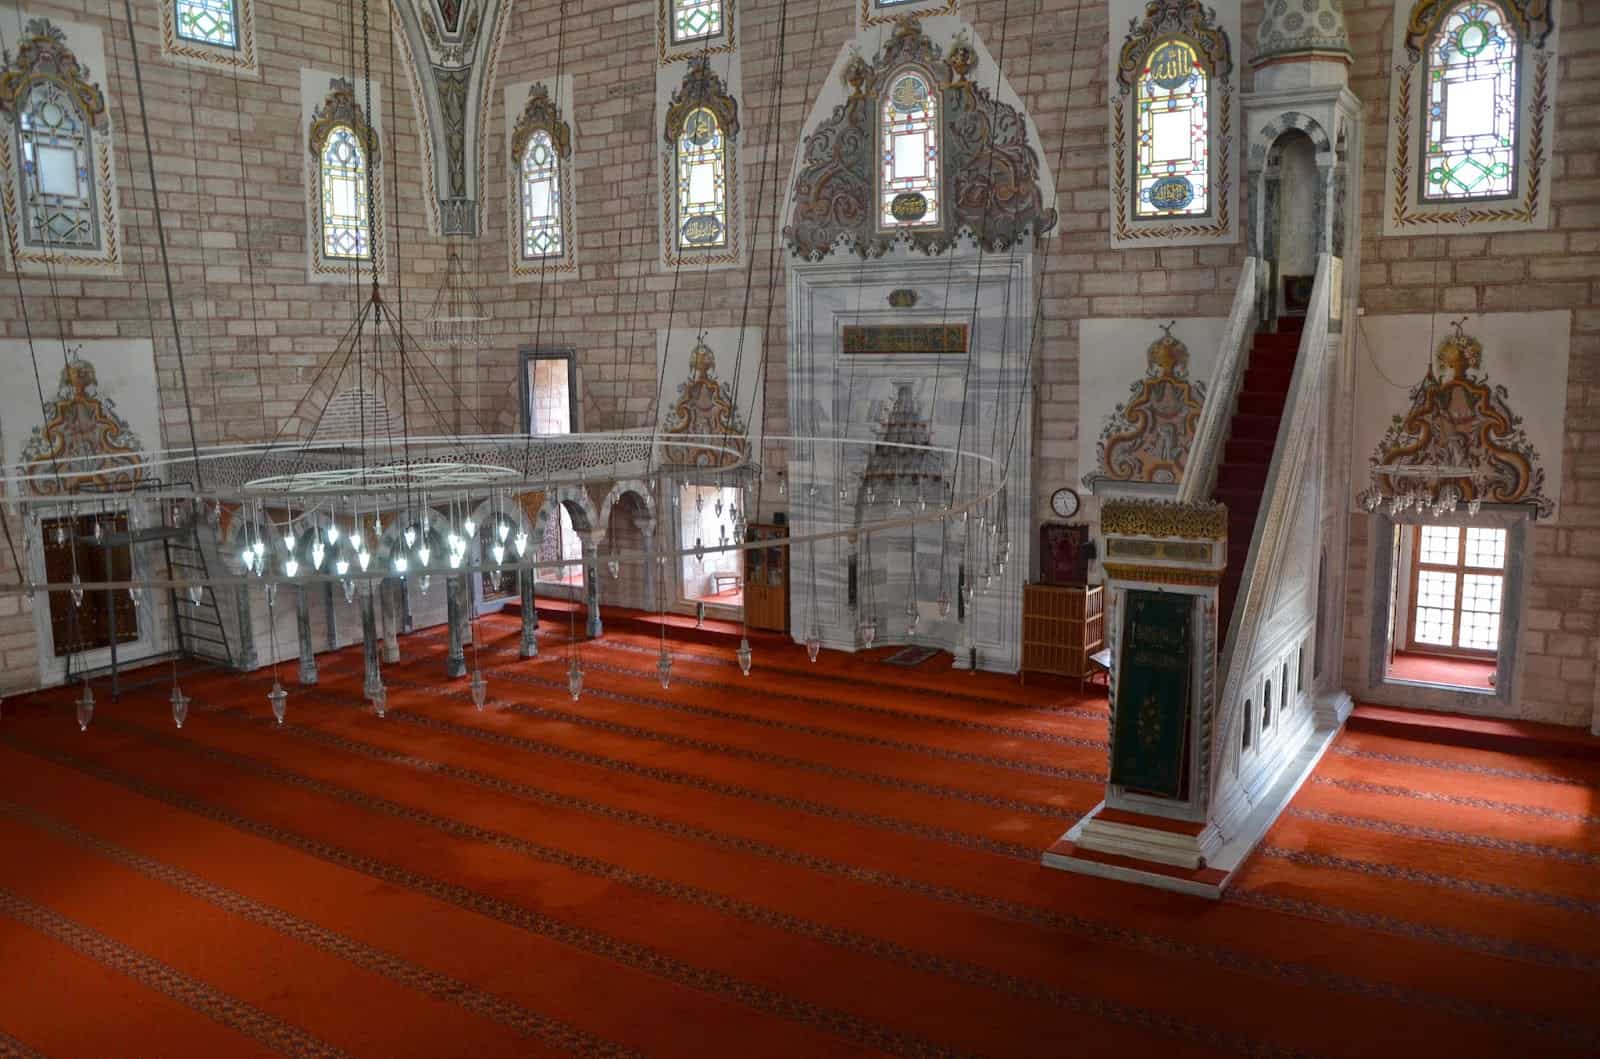 Prayer hall from the balcony at the Bayezid II Mosque at the Bayezid II Complex in Edirne, Turkey